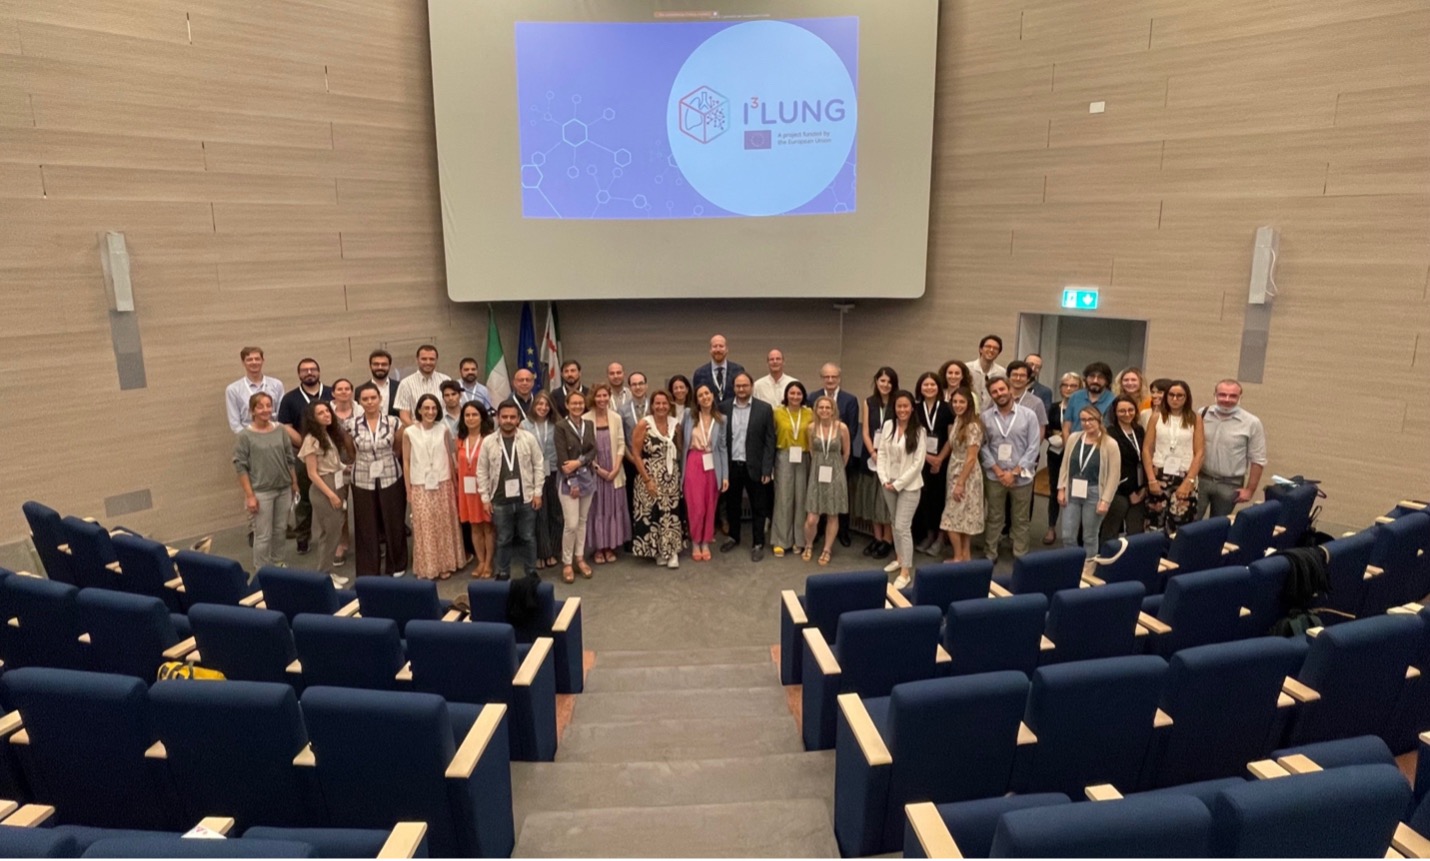 I3LUNG Partners Meet in Barcelona to Advance the Application of Artificial Intelligence (AI) to Lung Cancer